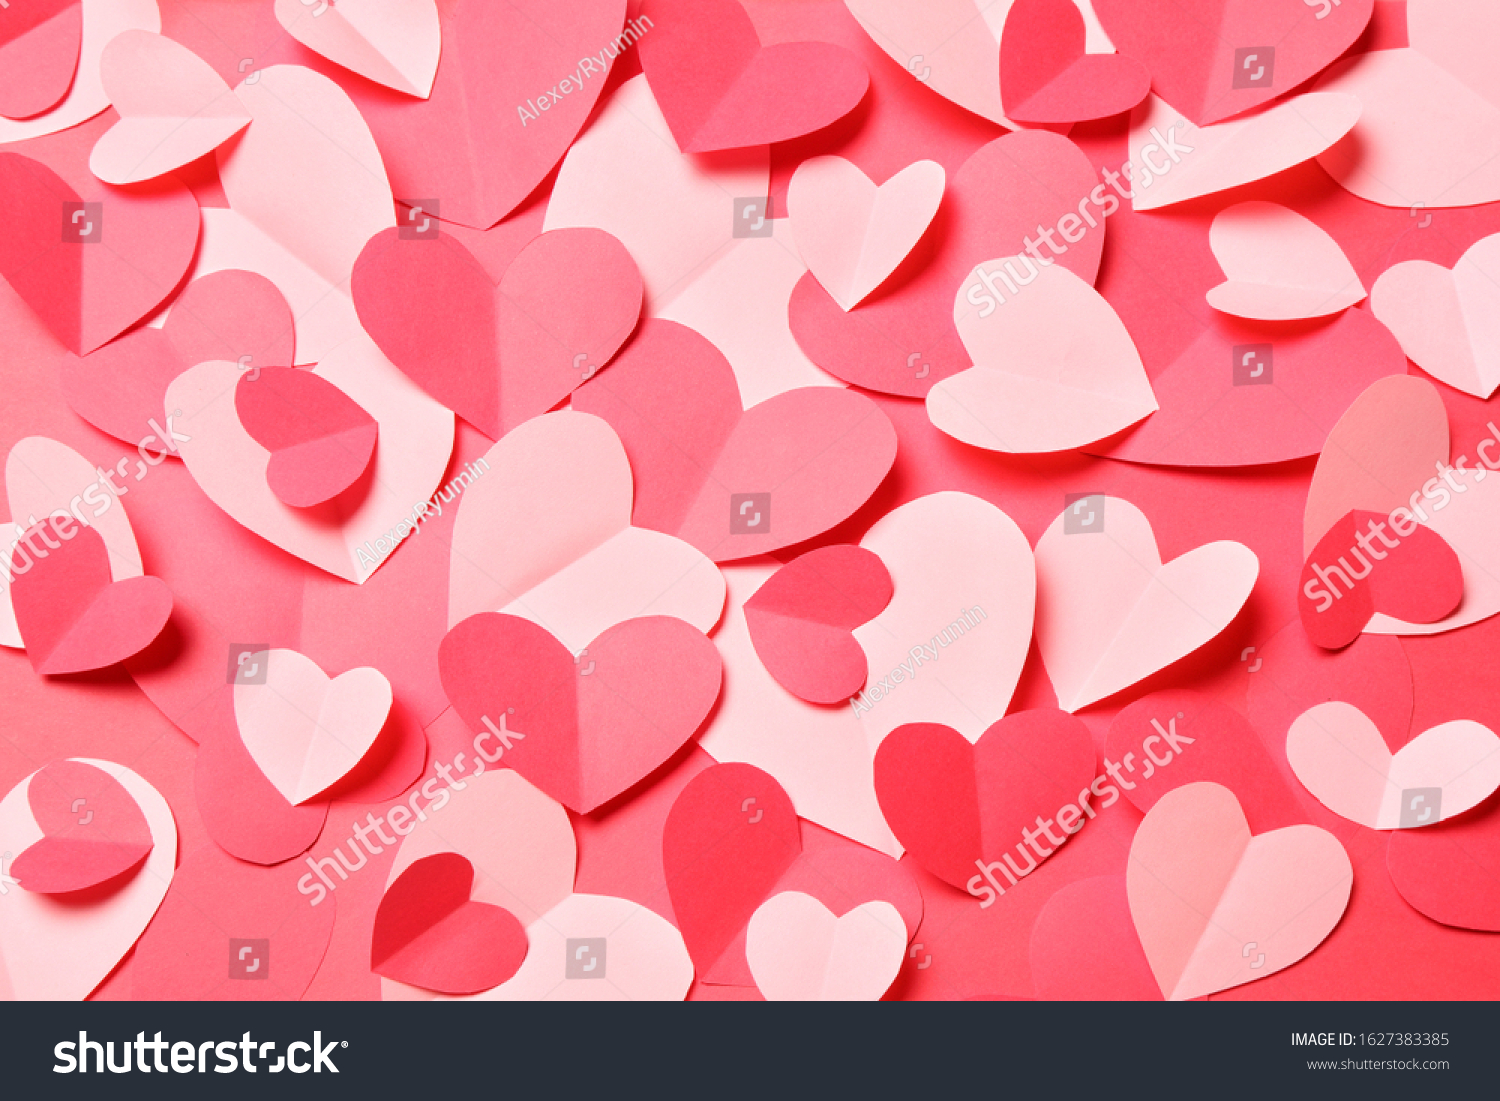 Bunch of cut out of pink and red paper hearts on red background. Cute Valentines day, Womans day, love, romantic or wedding card, banner, invitation, sale, offer, ad background  for banner, congratulation, card, offer, flyer, advertising, invitation.